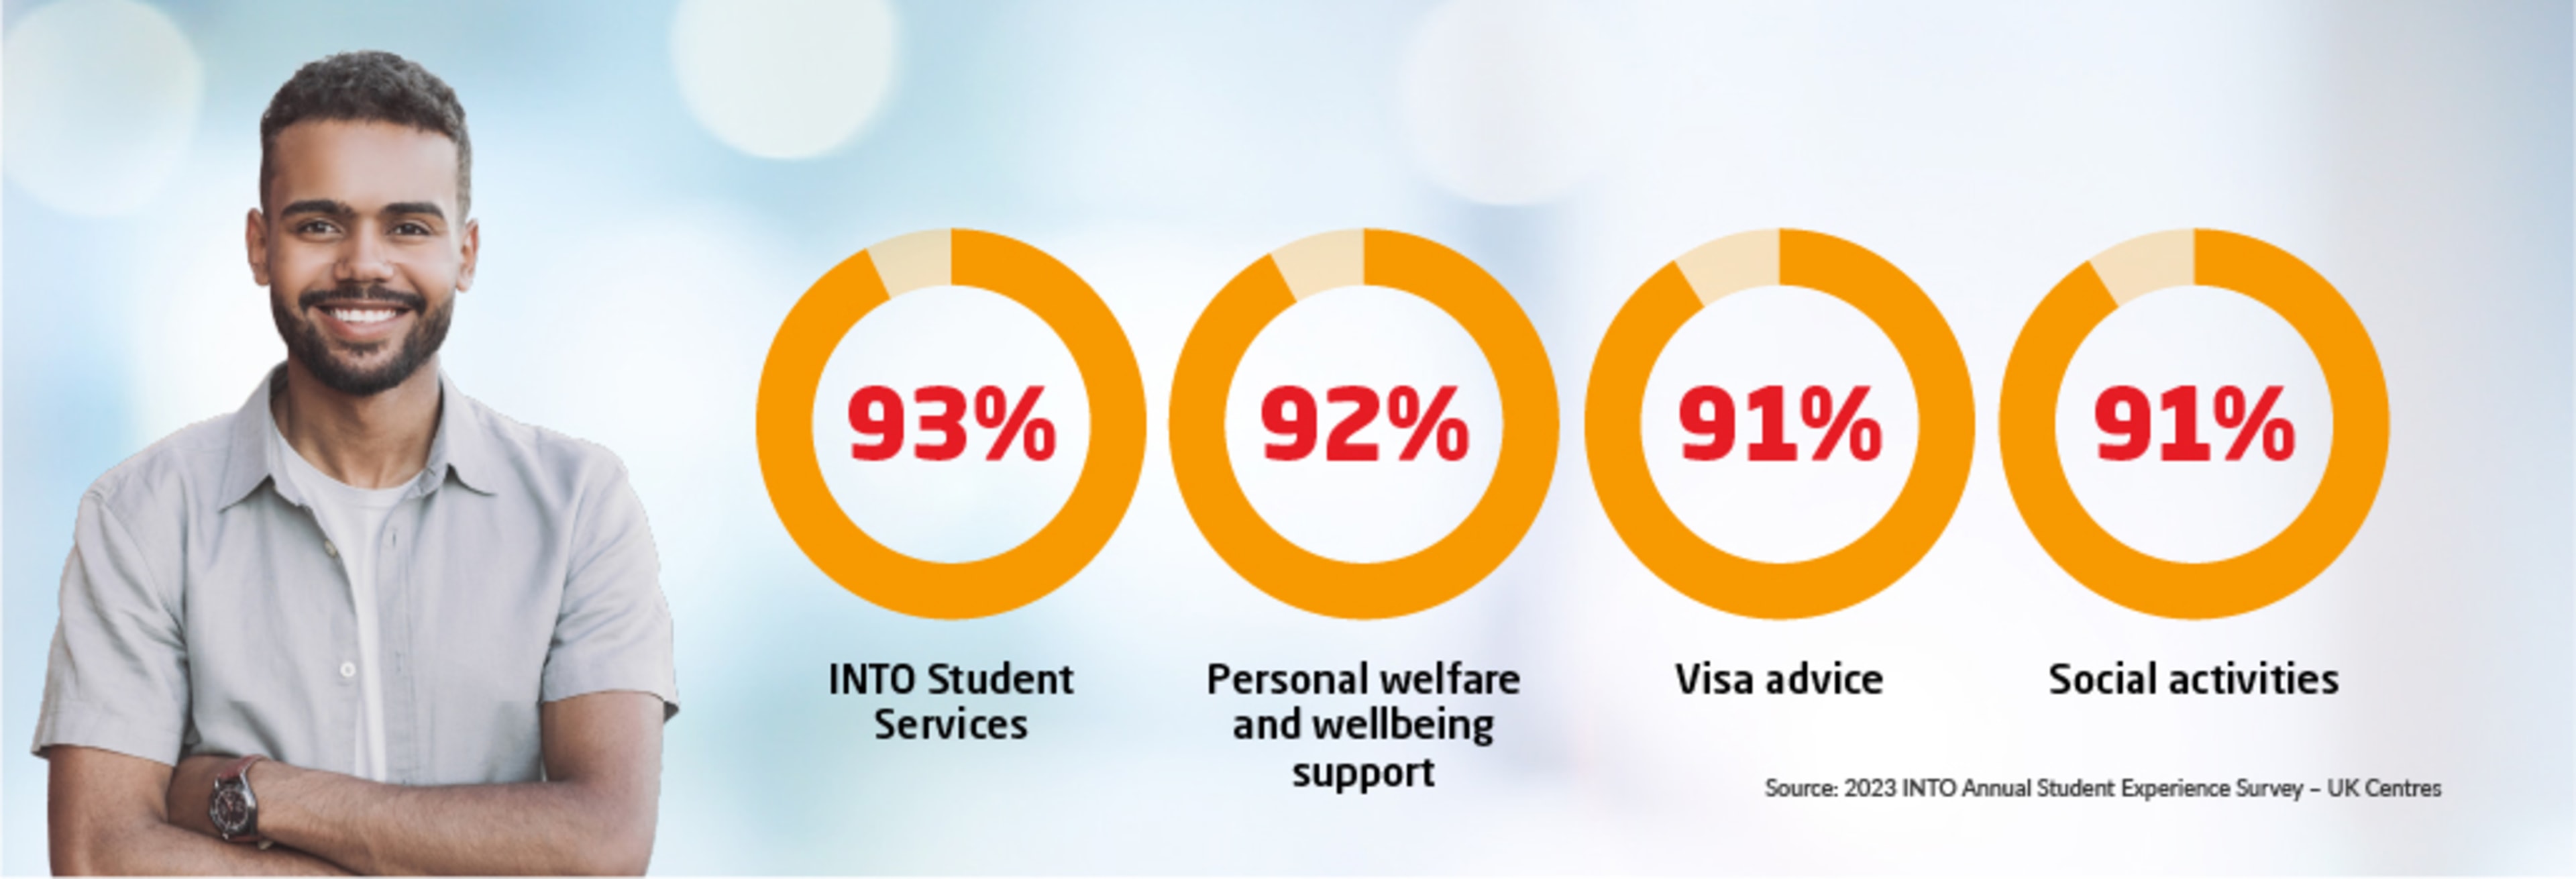 93% INTO Student Services | 92% Personal welfare and wellbeing support | 91% Visa advice | 91% Social activities